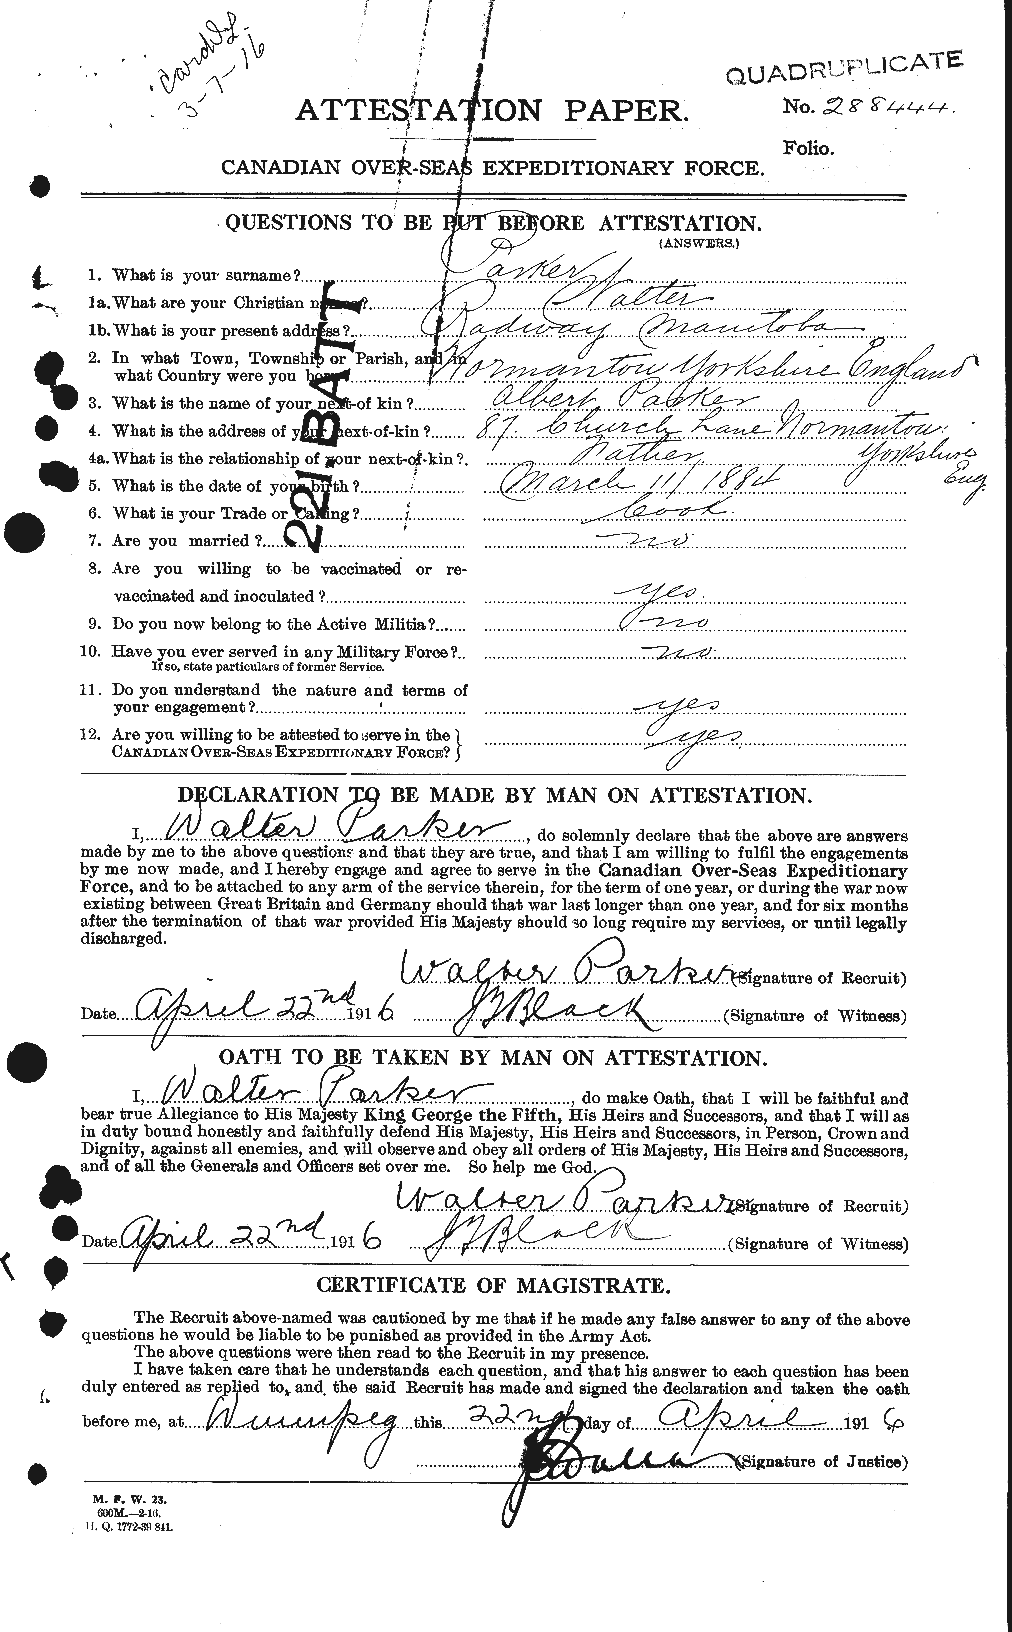 Personnel Records of the First World War - CEF 565686a